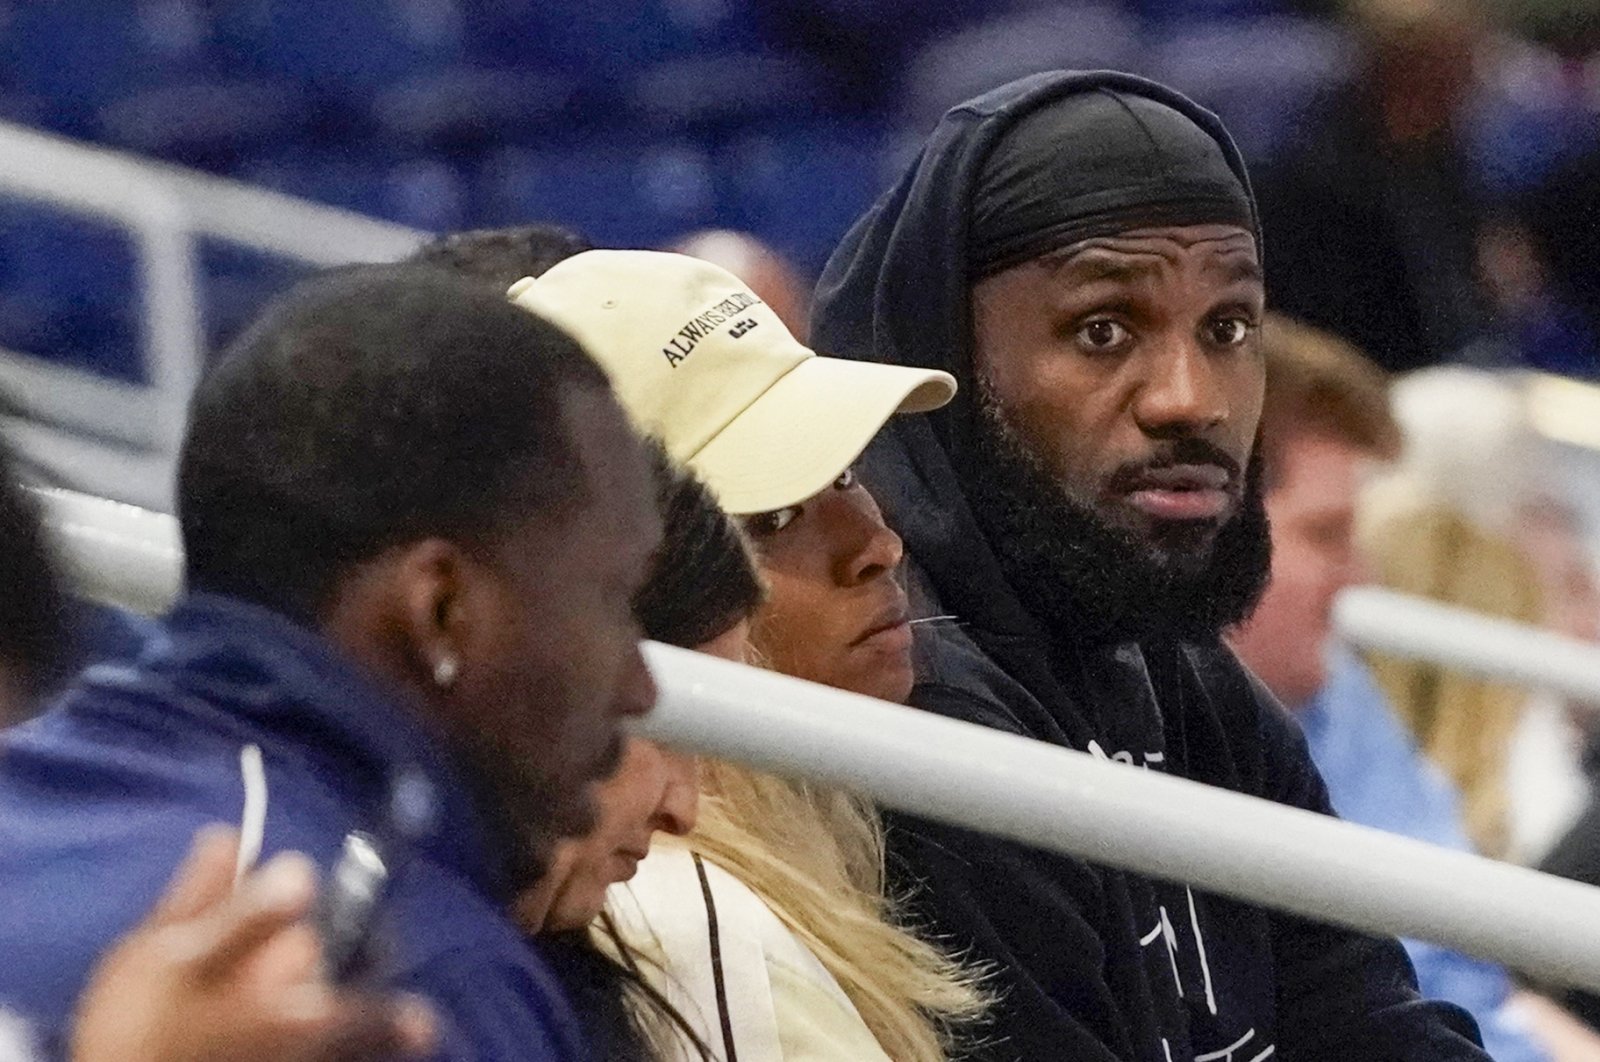 LeBron unfollows Diddy on Instagram after girlfriend battery video